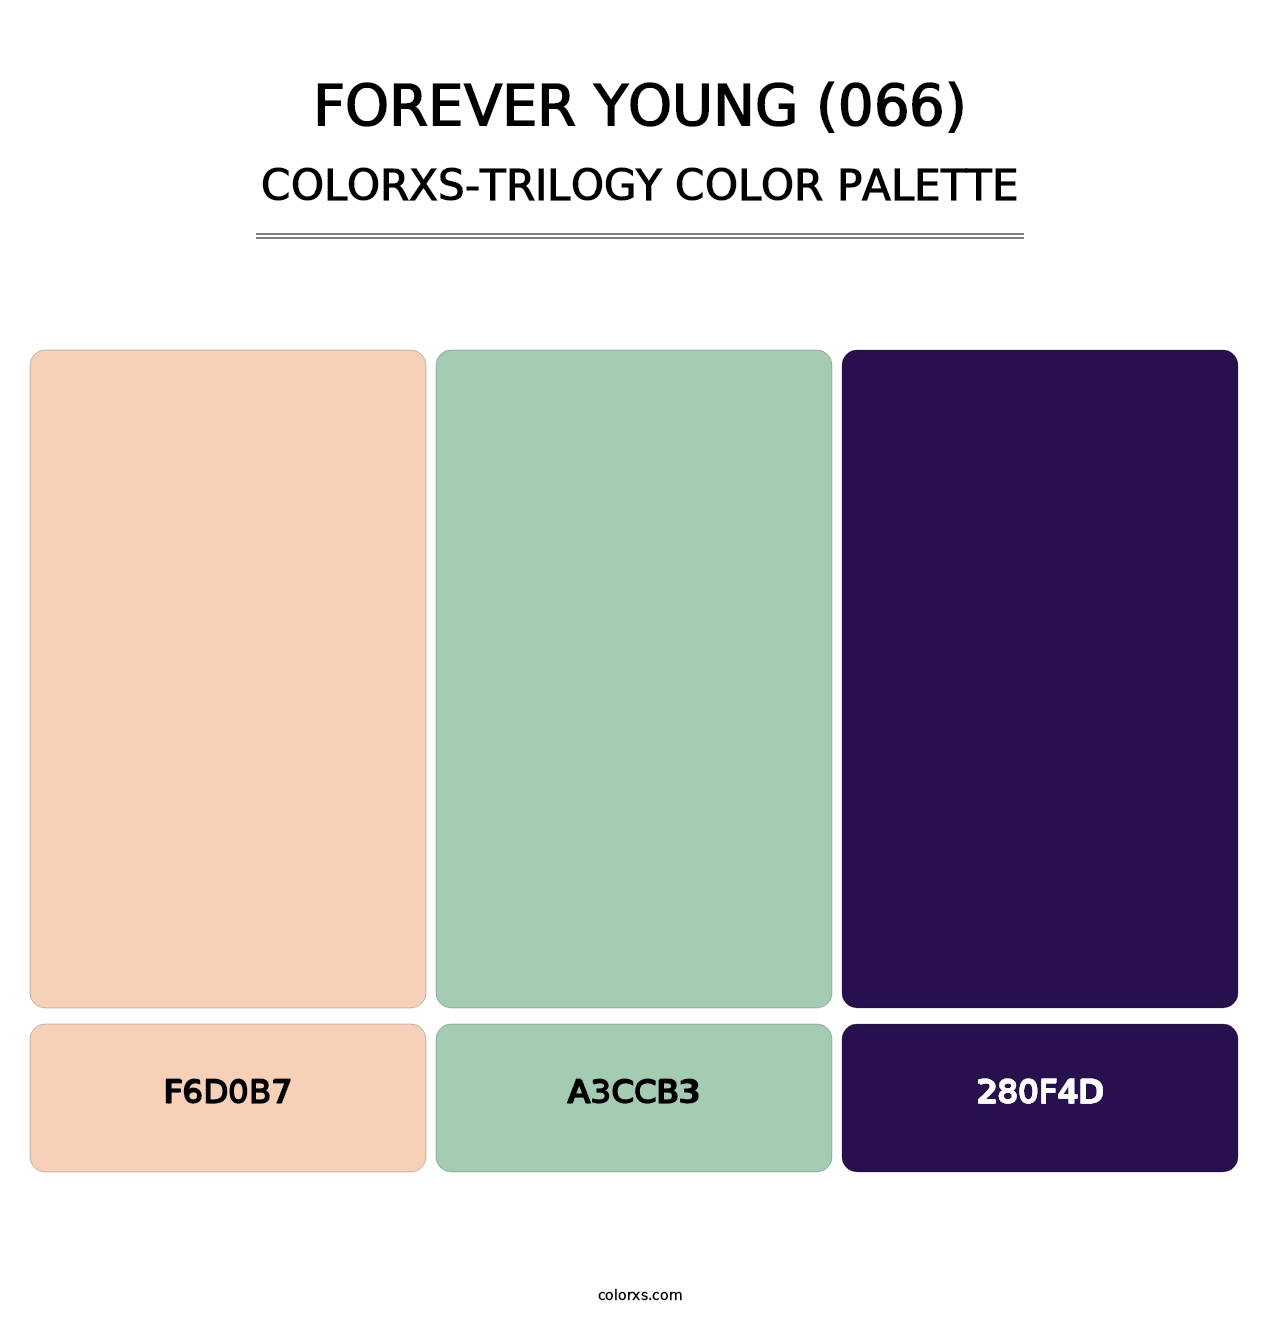 Forever Young (066) - Colorxs Trilogy Palette